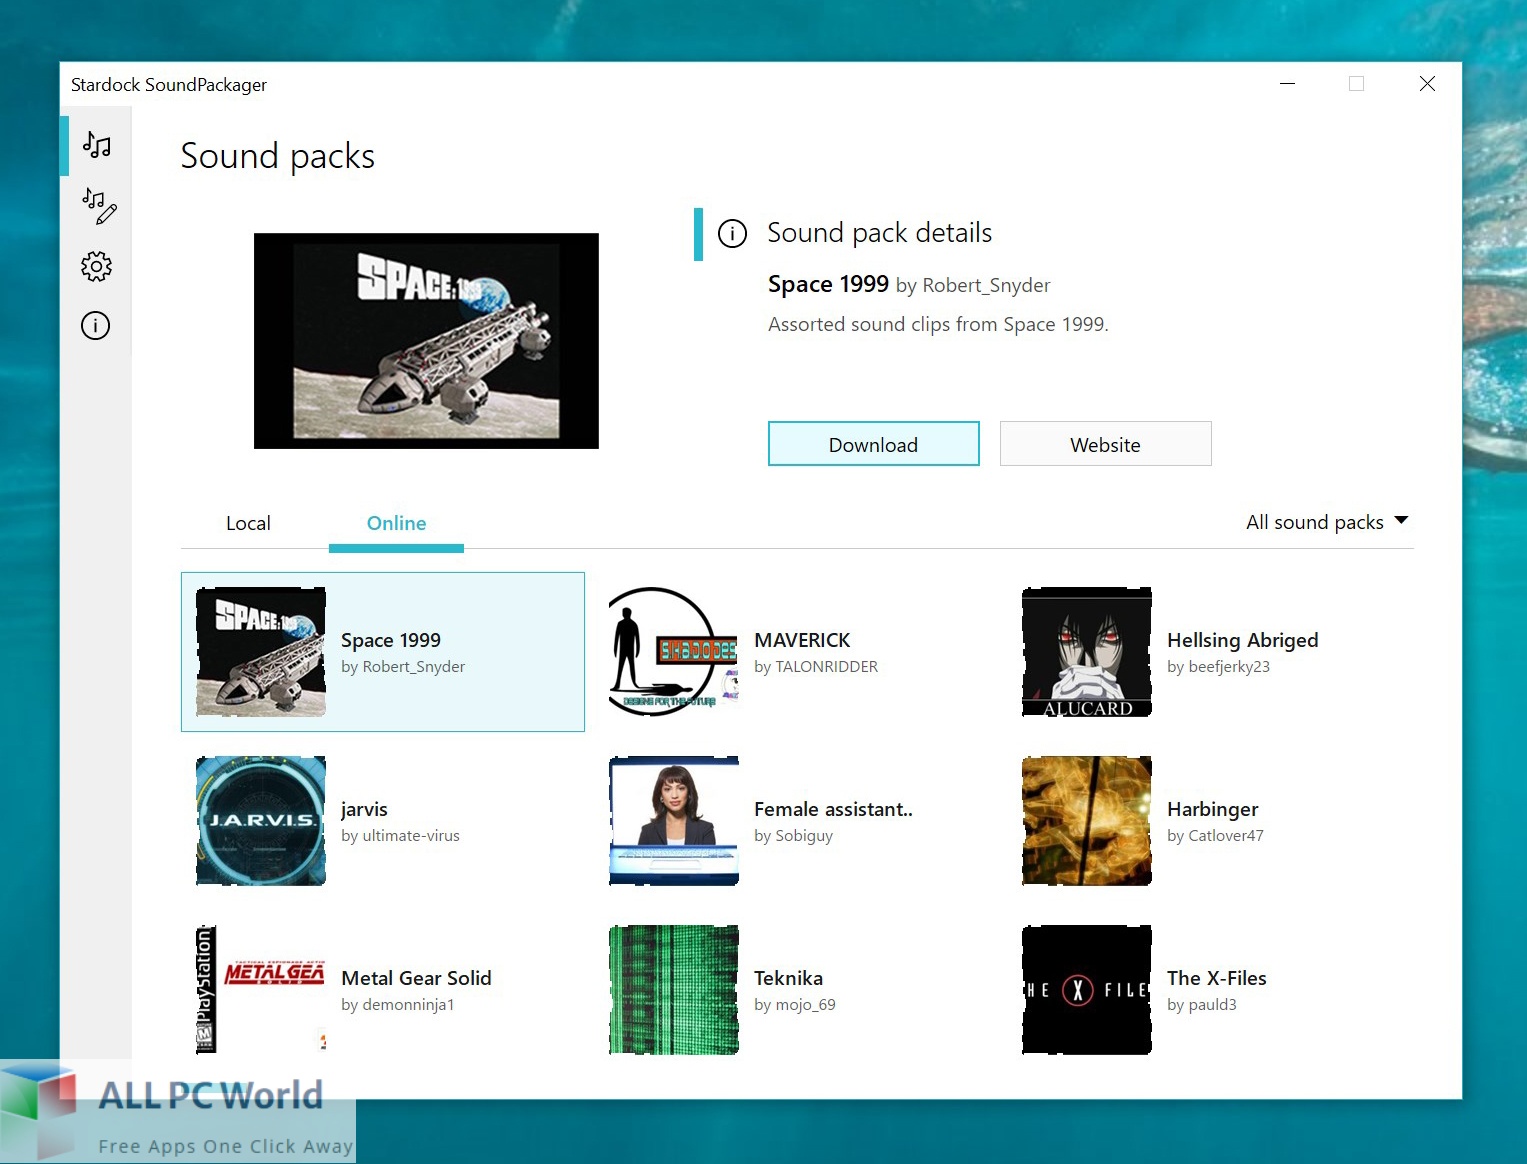 Stardock SoundPackager for Free Download